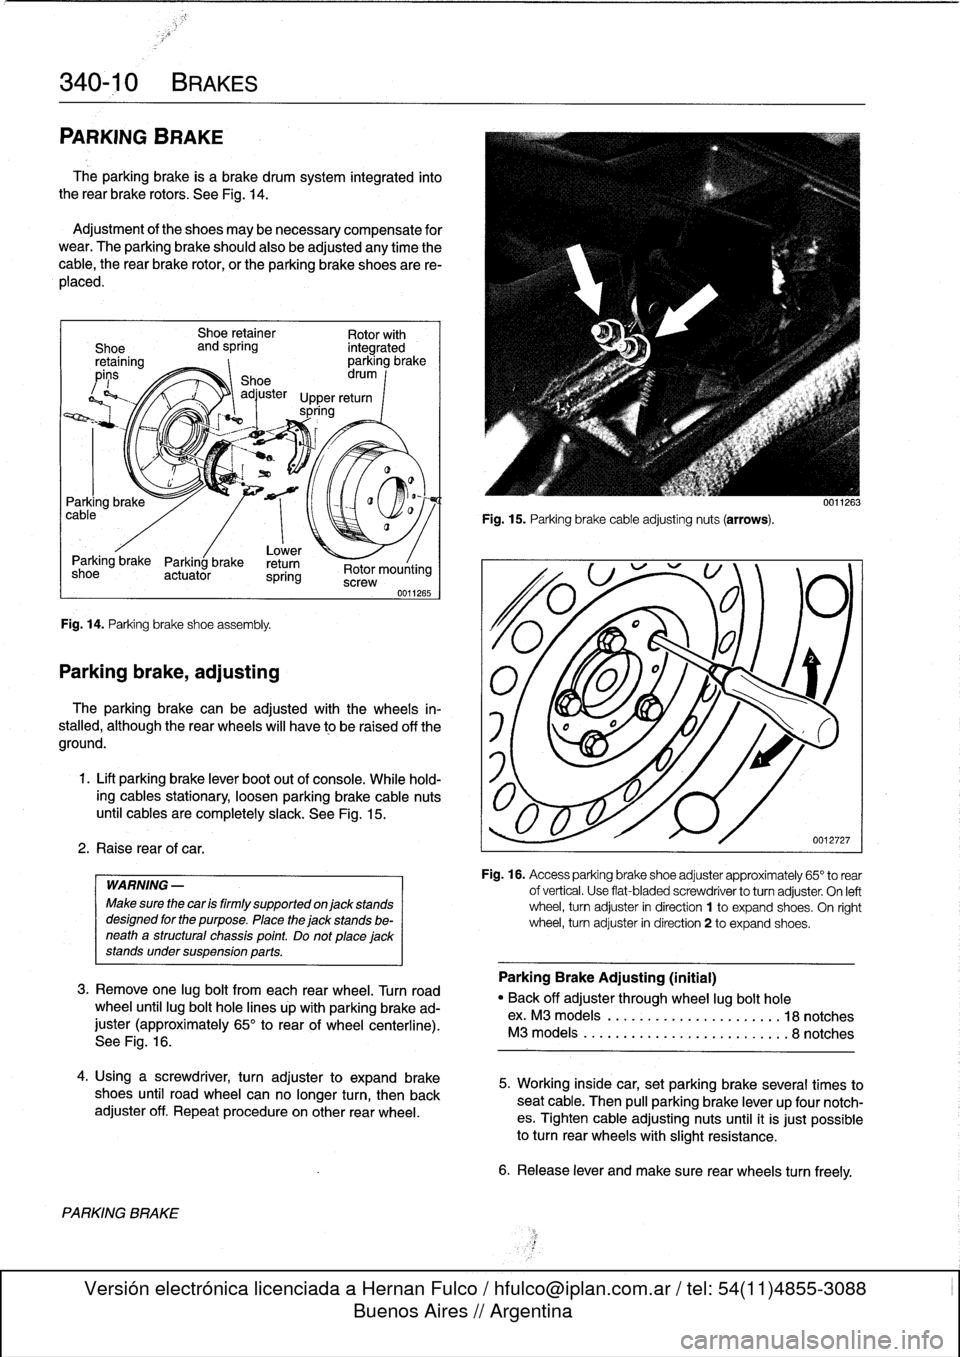 BMW M3 1996 E36 Workshop Manual 
340-
1
0
BRAKES

PARKING
BRAKE

The
parking
brake
is
a
brake
drum
system
integrated
into
the
rear
brake
rotors
.
See
Fig
.
14
.

Adjustment
of
the
shoes
may
benecessary
compensate
for
wear
.
The
park